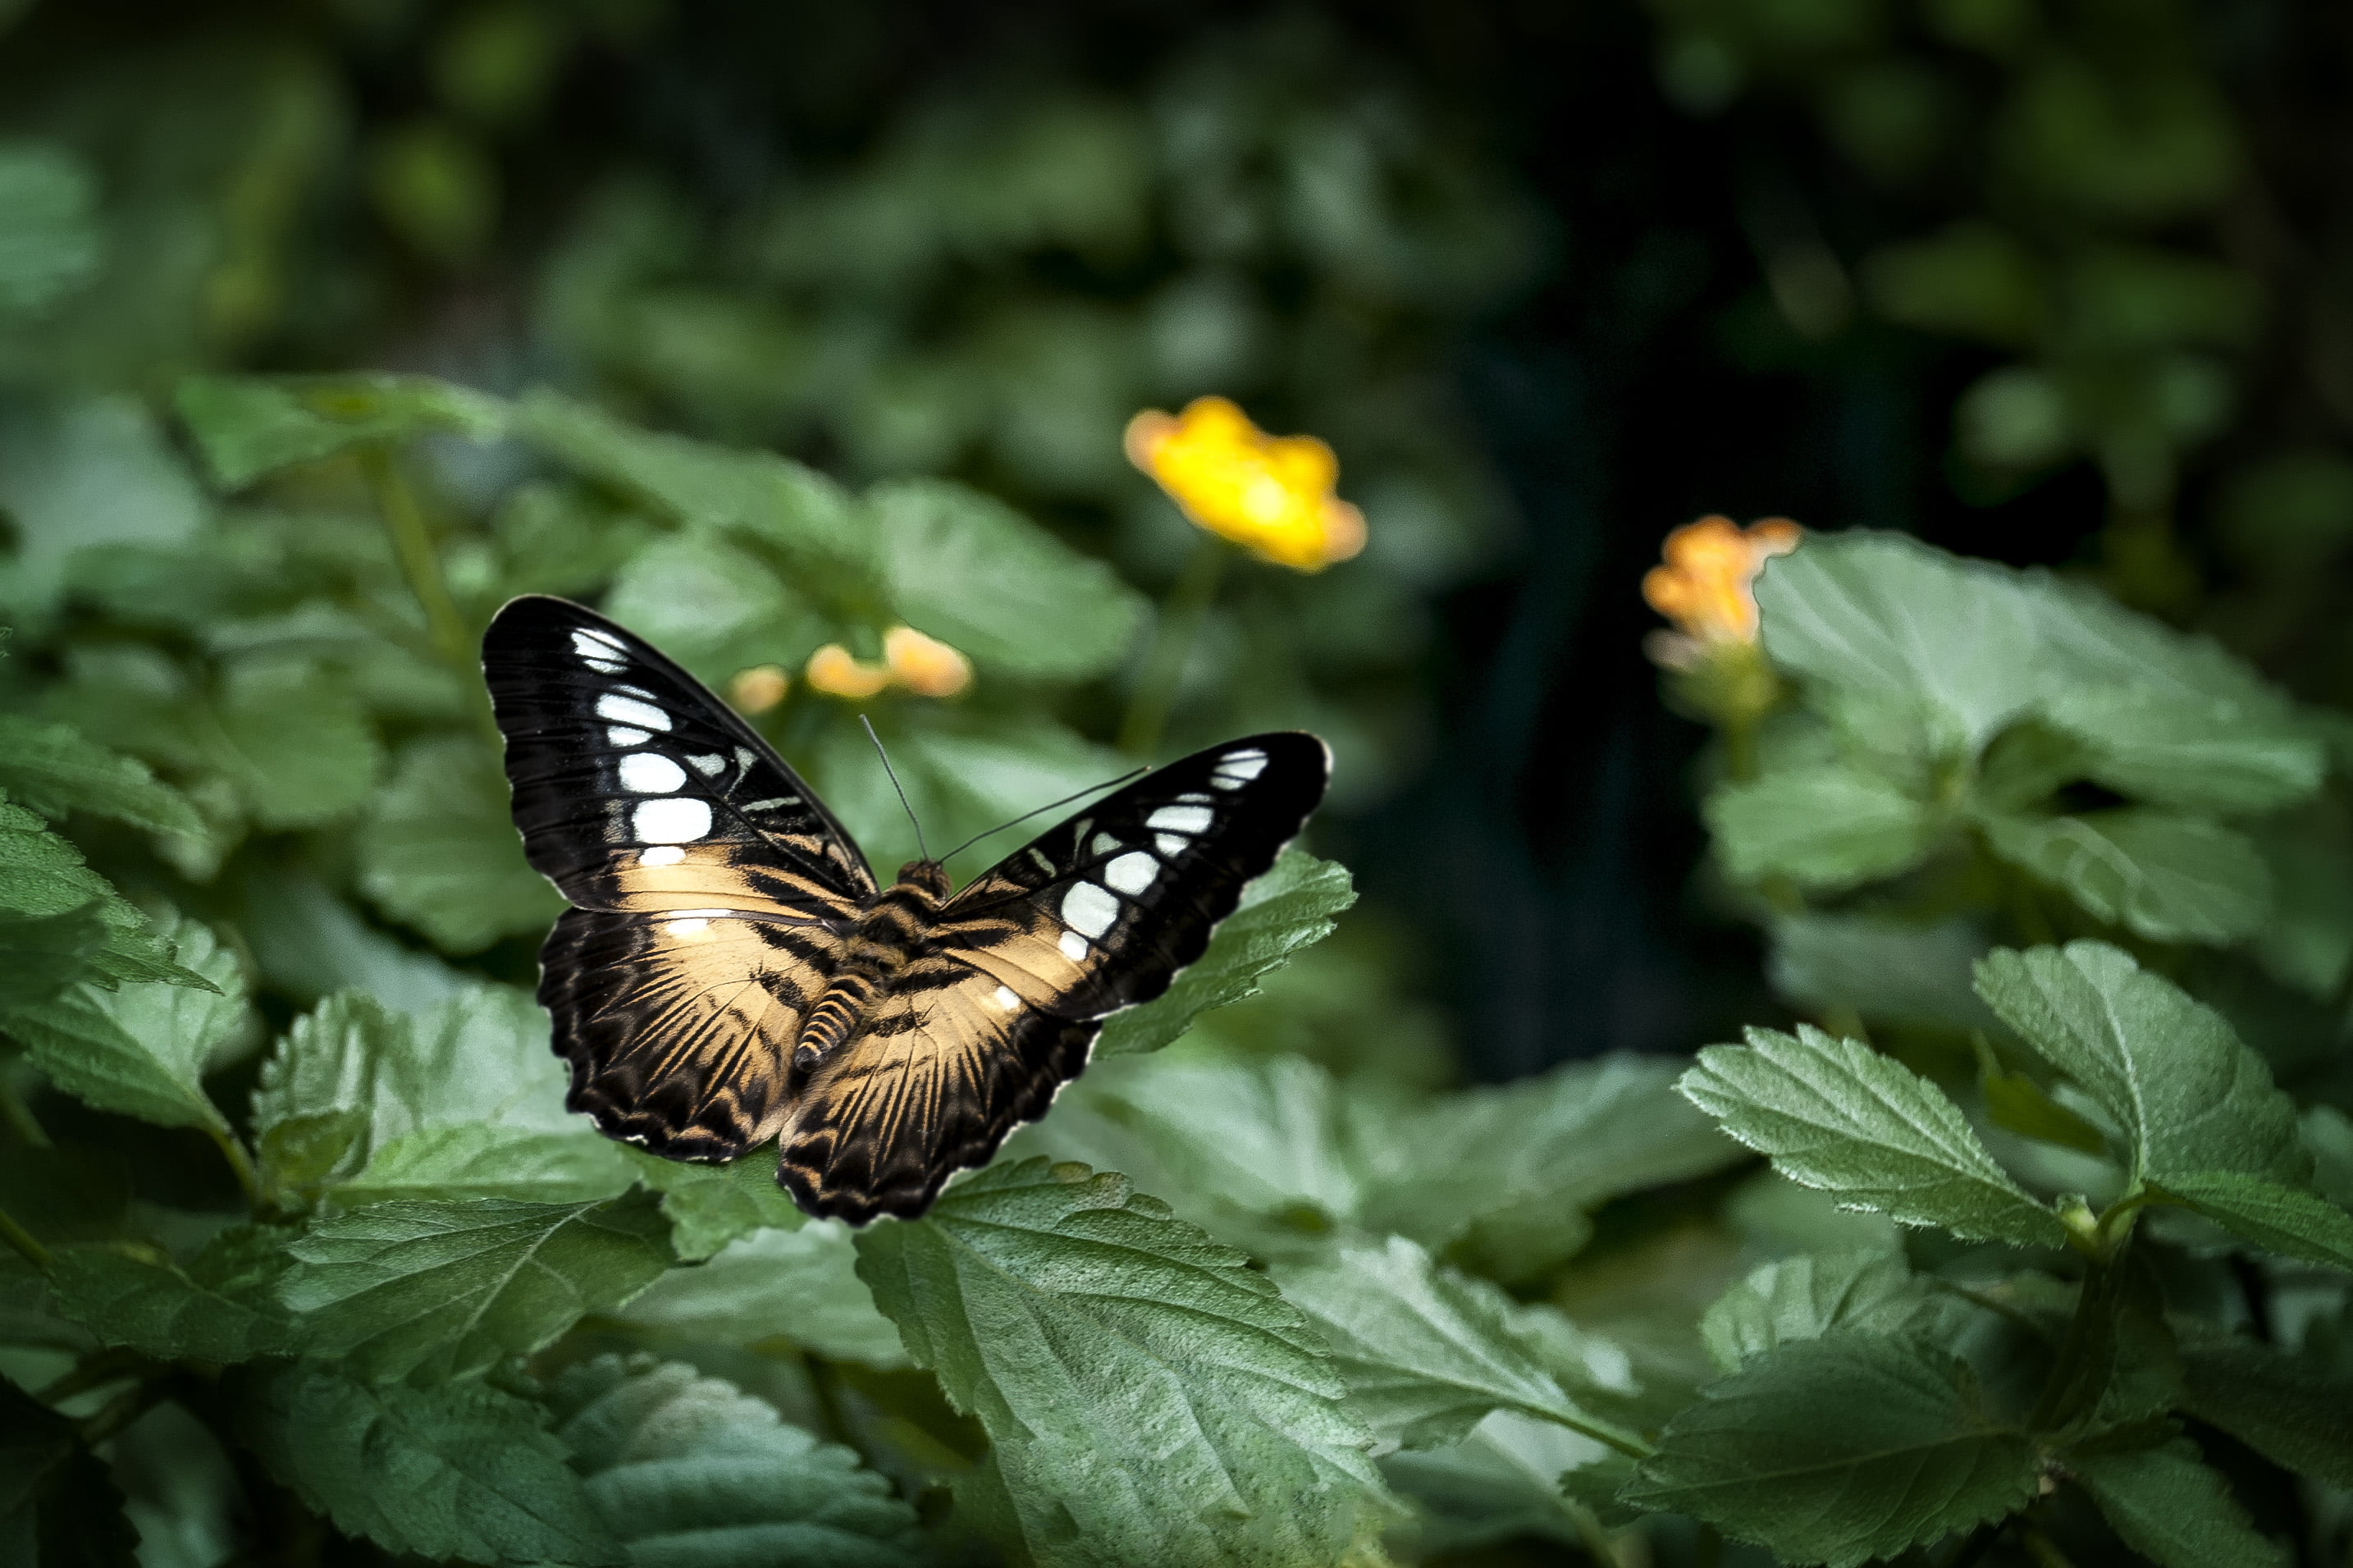 closeup photography of black and yellow butterfly on green leaf